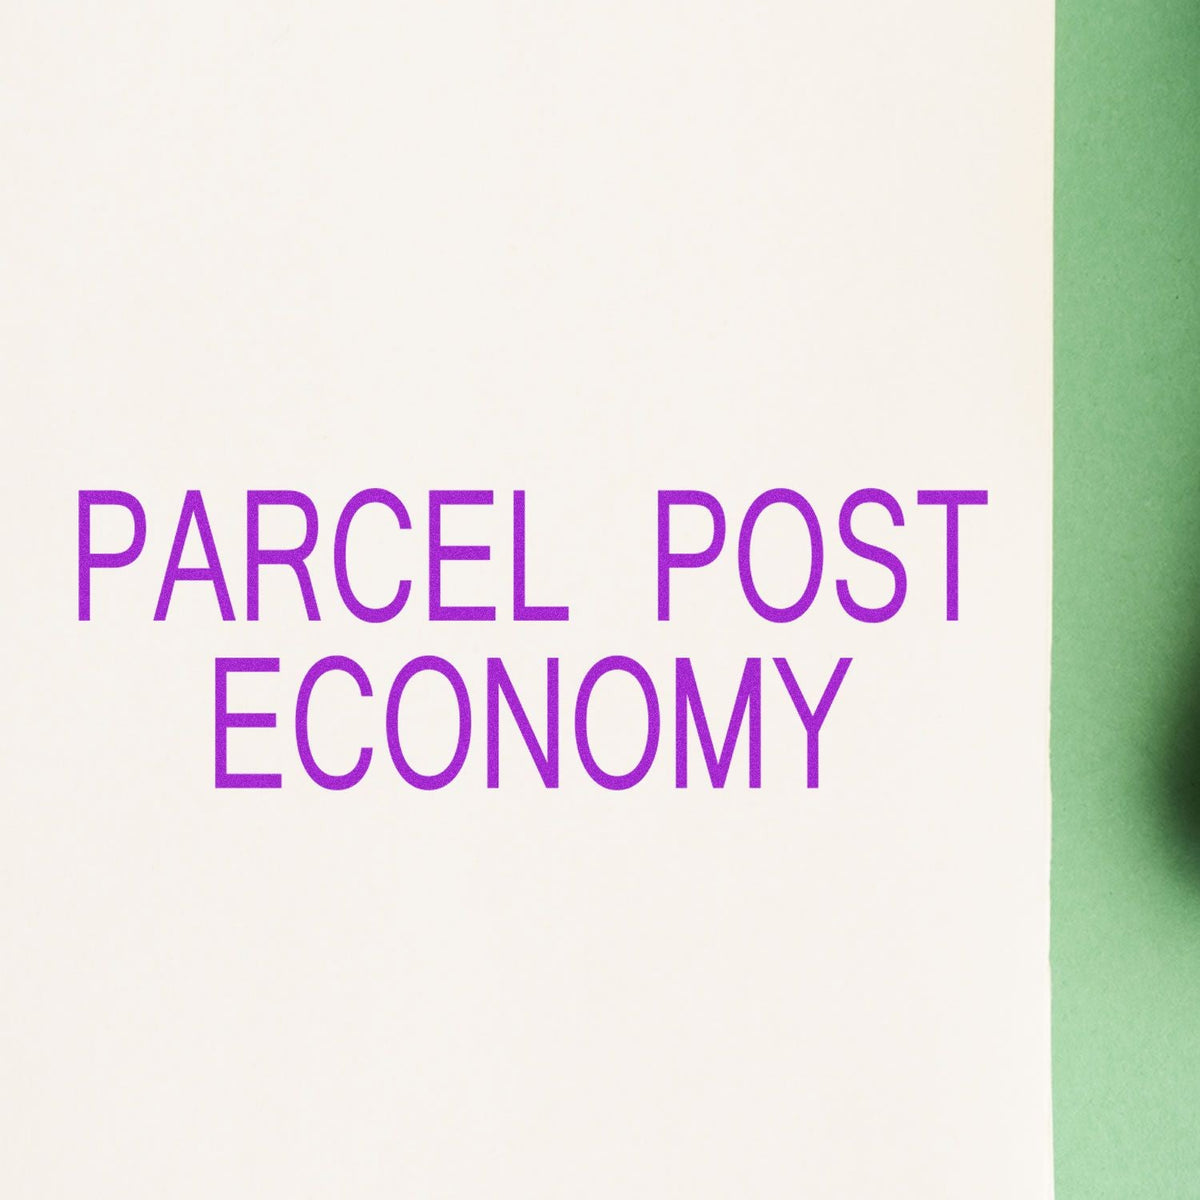 Self-Inking Parcel Post Economy Stamp In Use